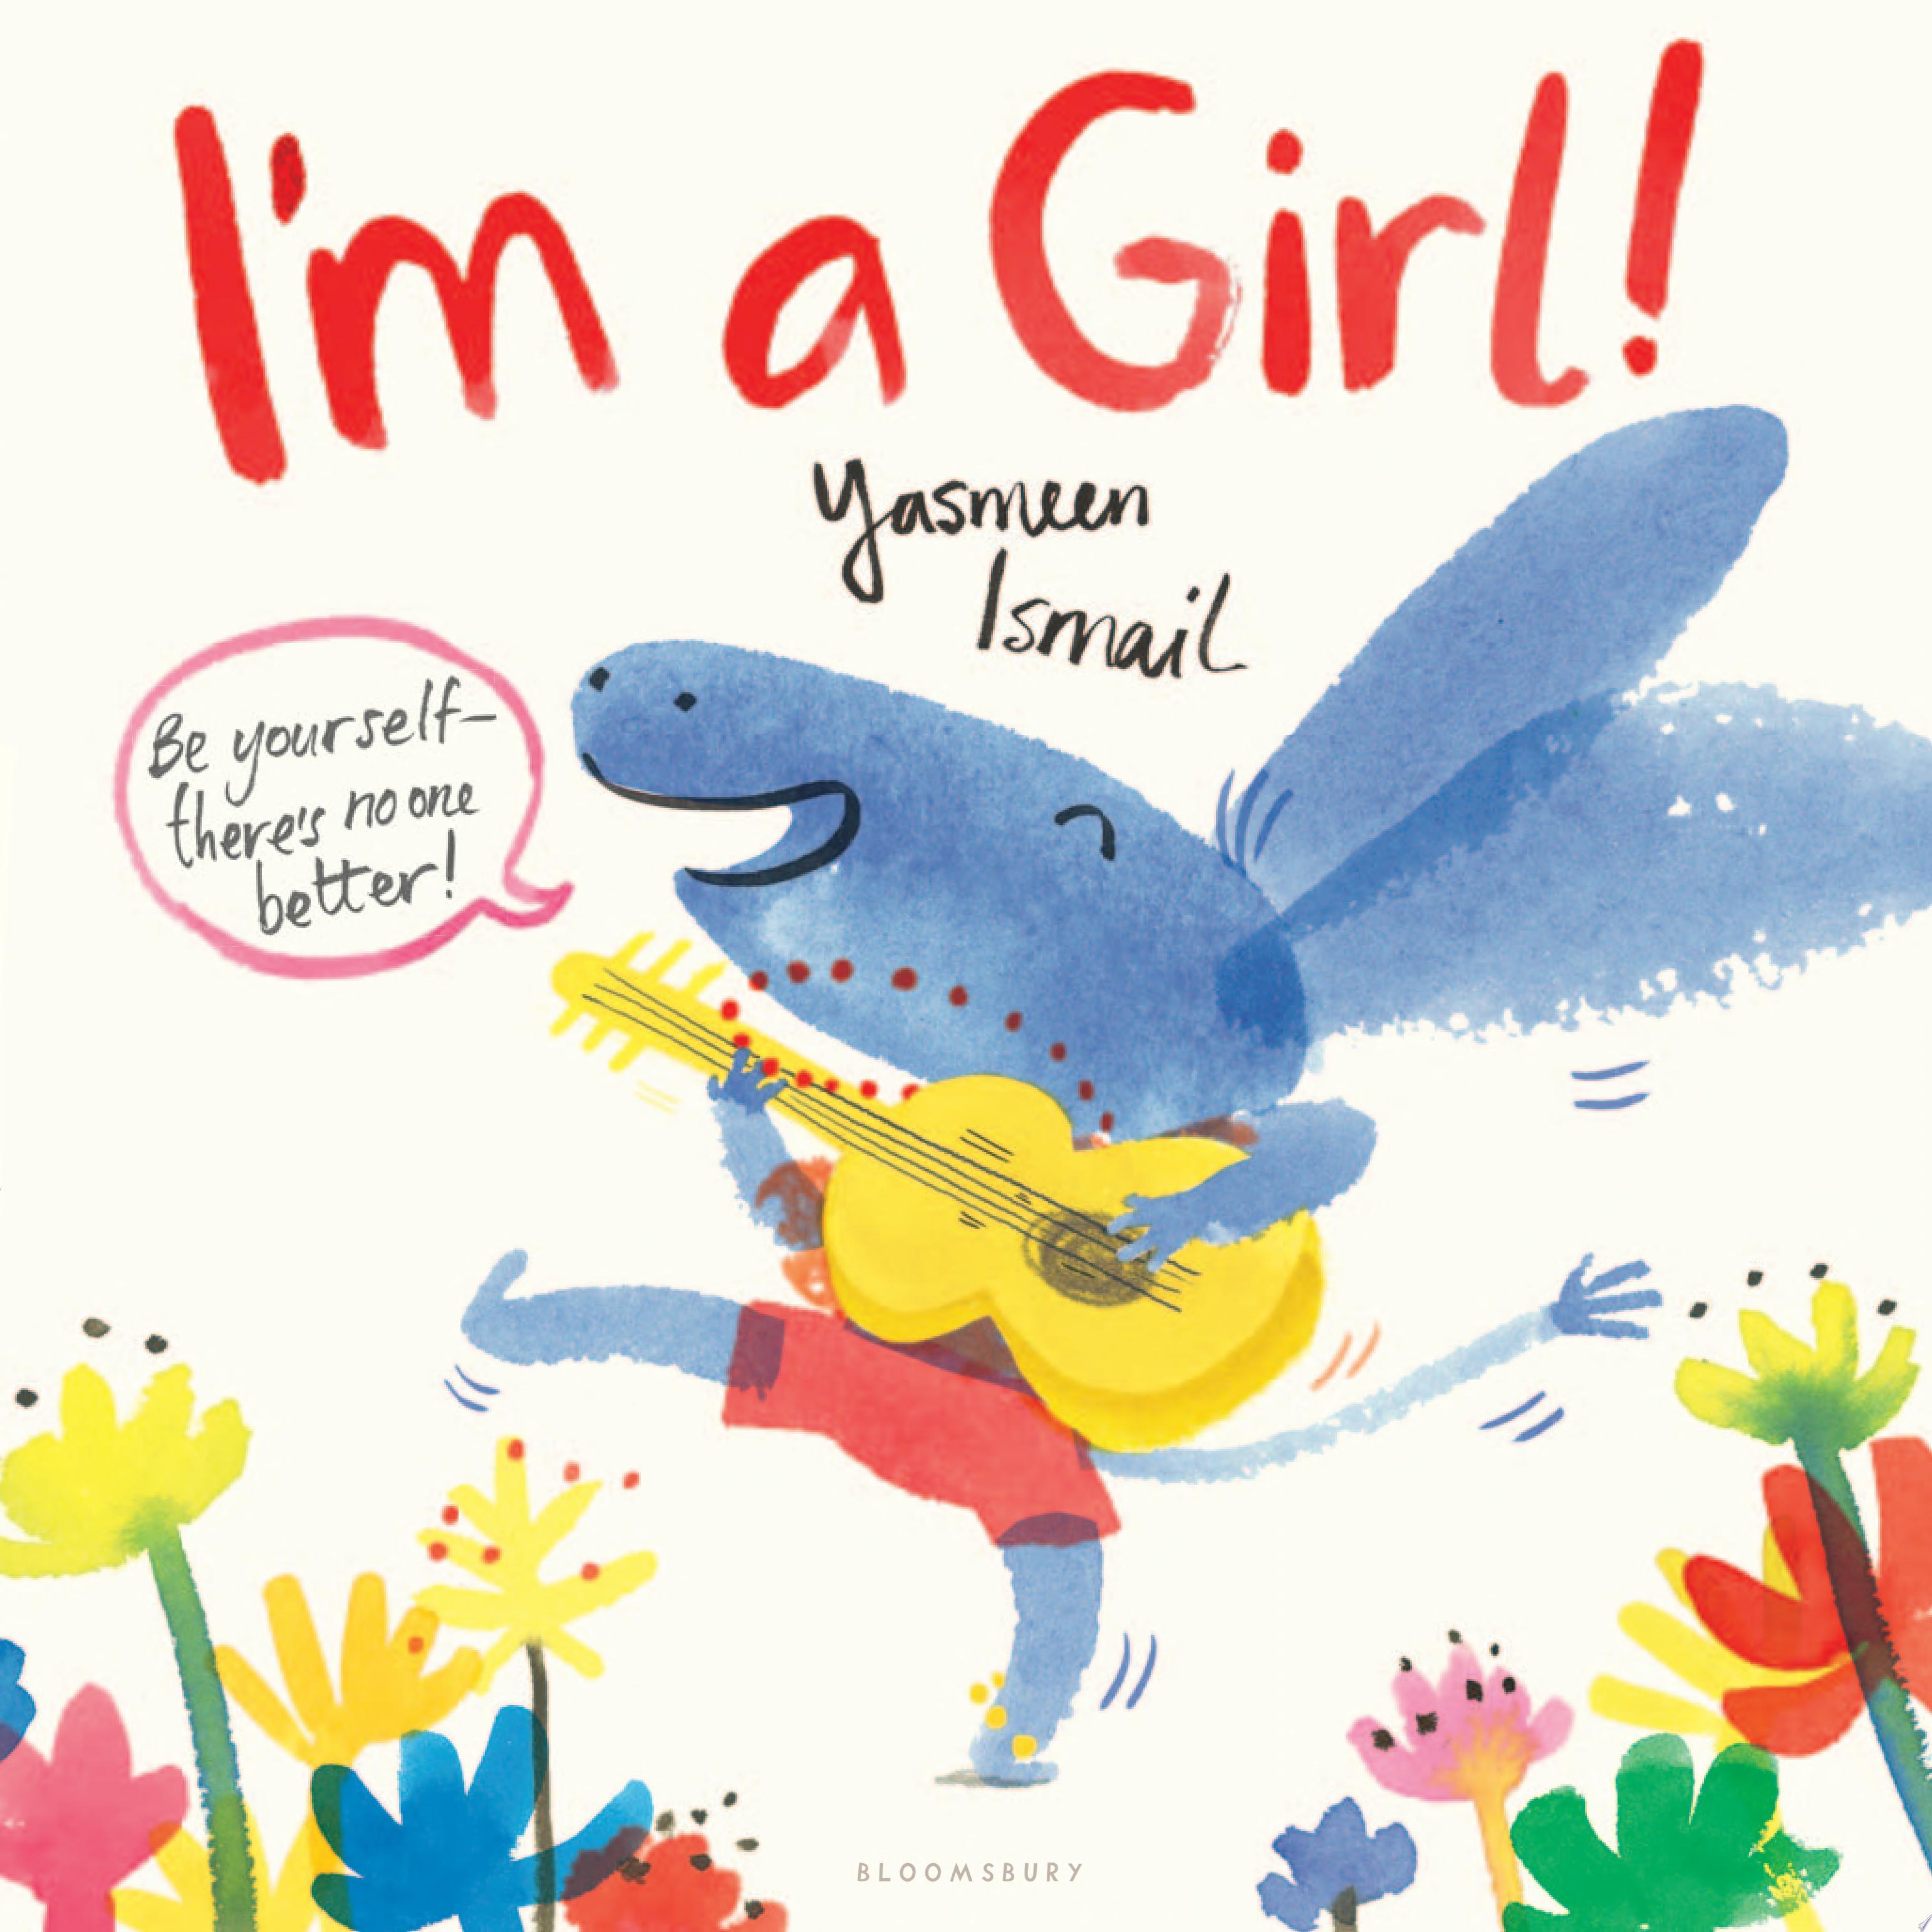 Image for "I&#039;m a Girl!"